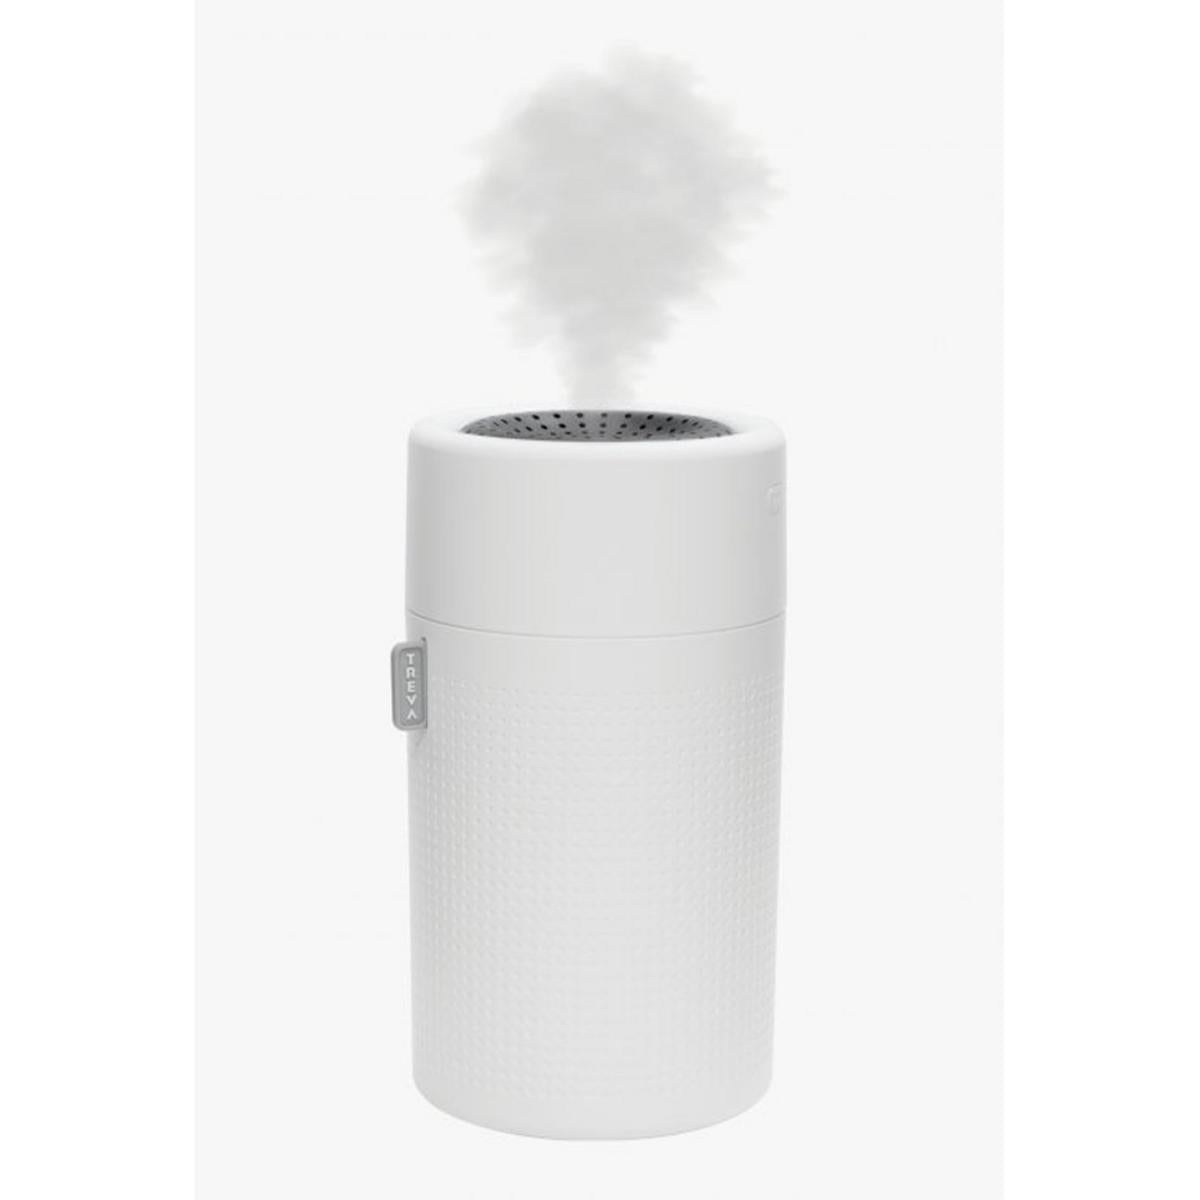 O2 Cool Treva Large Rechargeable 750 mL Humidifier - White